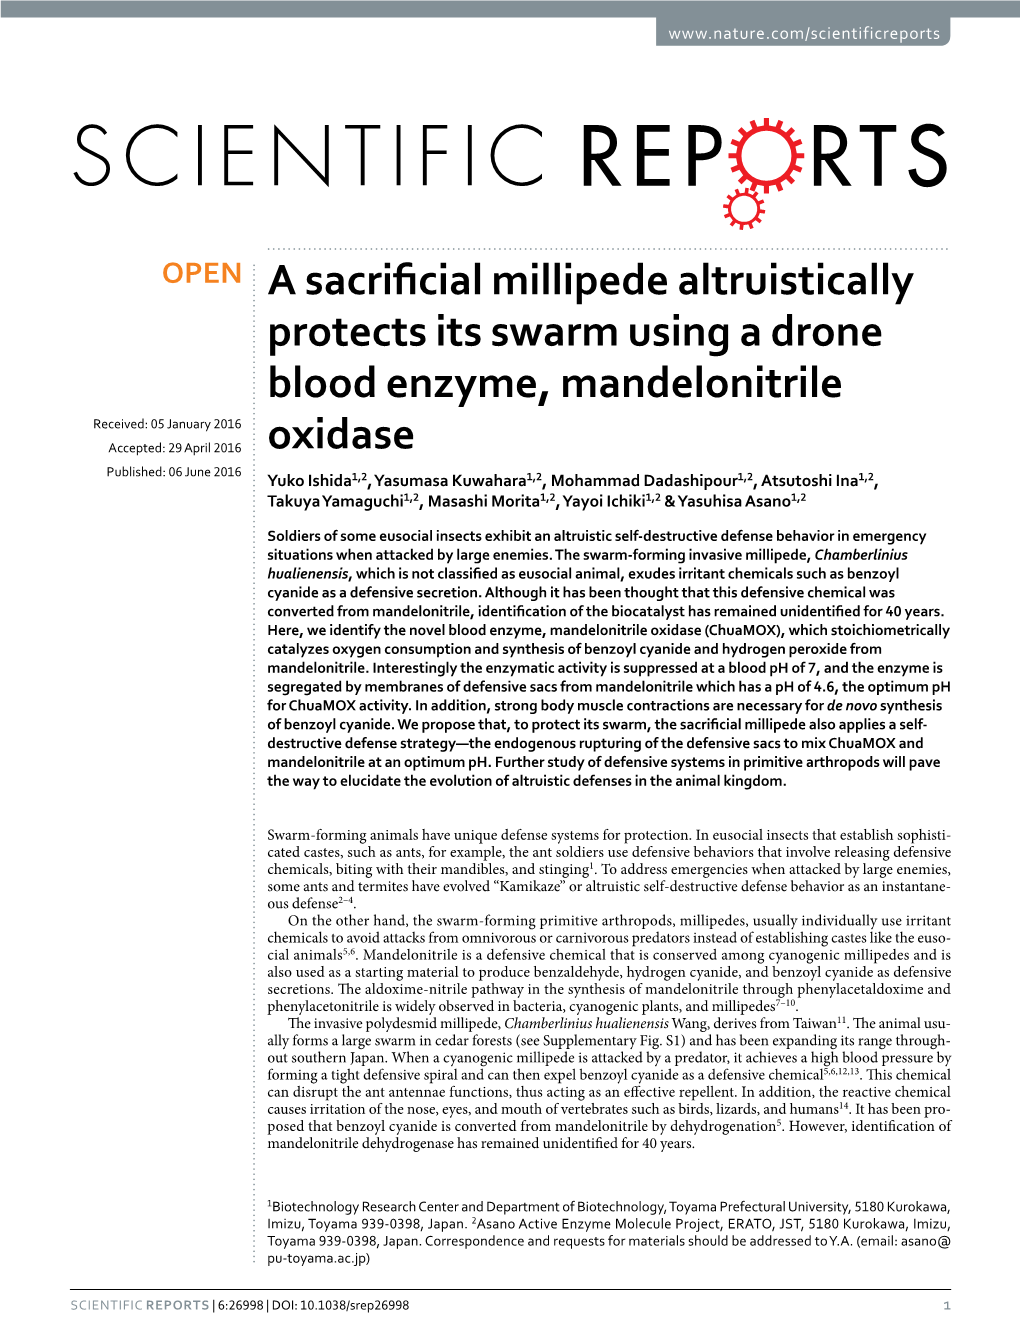 A Sacrificial Millipede Altruistically Protects Its Swarm Using a Drone